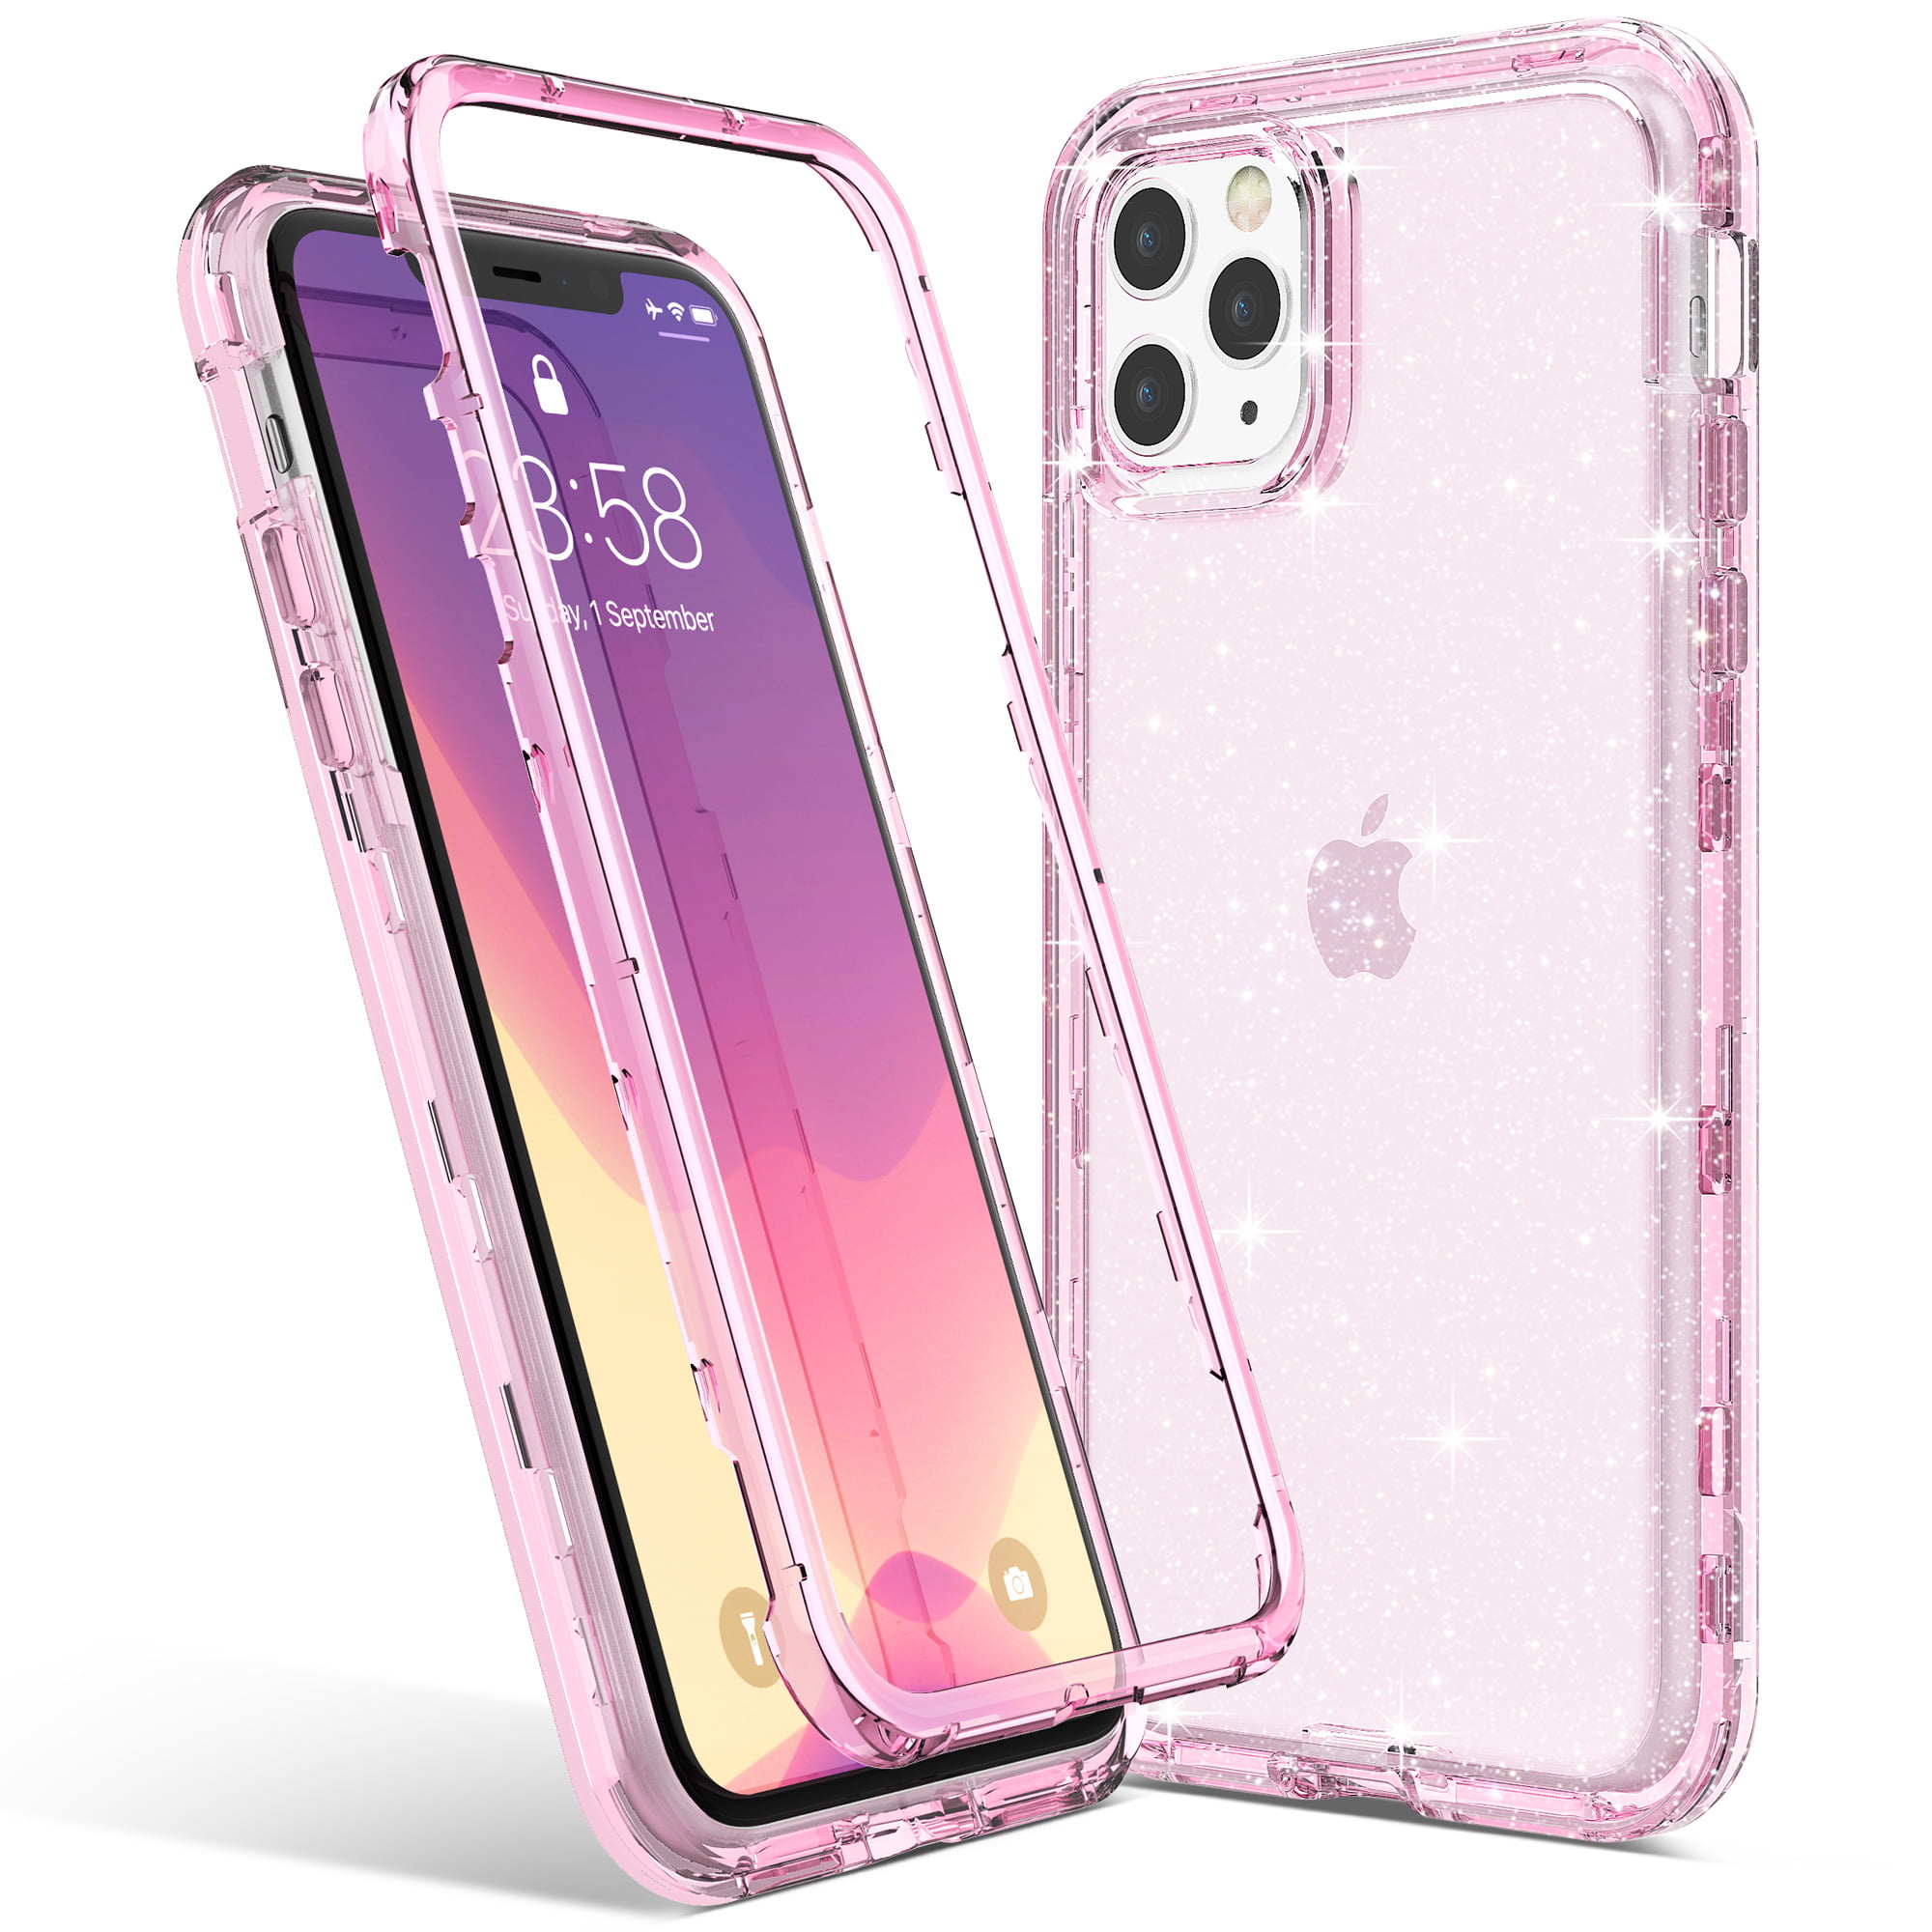 Iphone 11 Pro Max Case Ulak Slim Clear Glitter Heavy Duty Shockproof Rugged Protection Transparent Soft Tpu Protective Bling Phone Cover For Apple Iphone Pro Max 6 5 Inch 19 Pink Clear Glitter